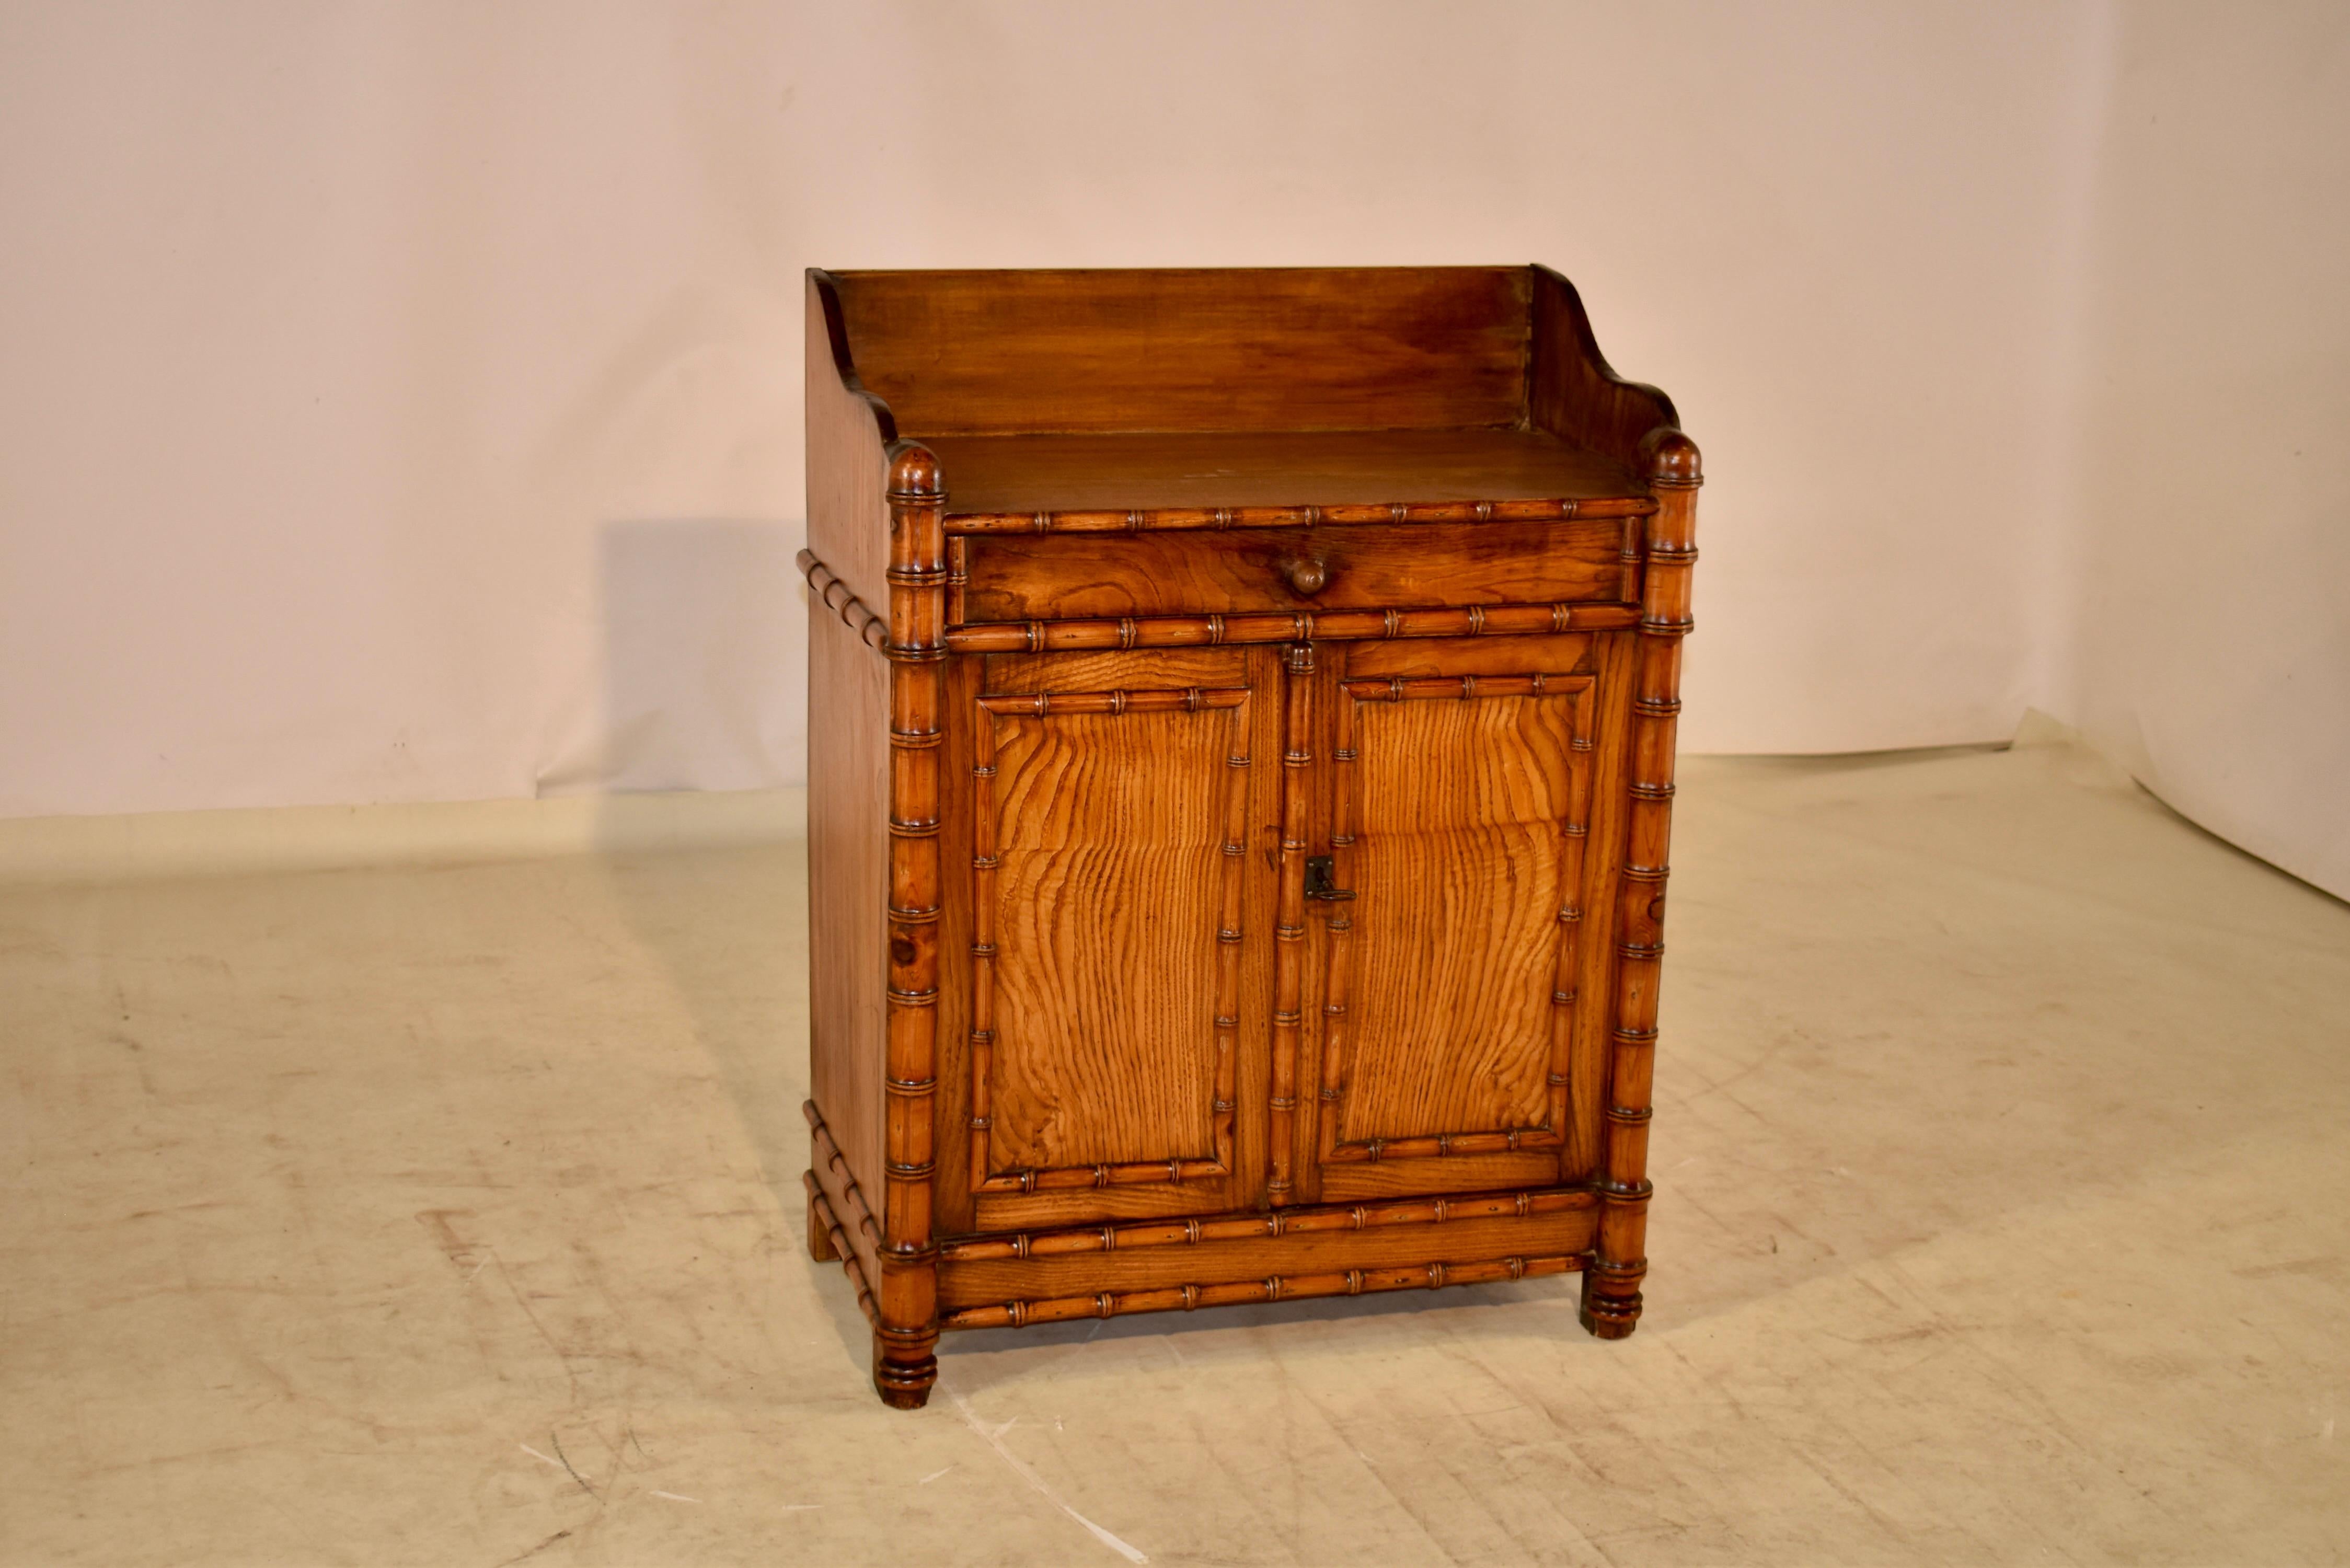 19th century small buffet from France, made from elm and cherry. The cabinet is a lovely small size and has a backsplash, which gives it a more stately appearance and has serpentined detail as well, following down to simple sides. The sides are